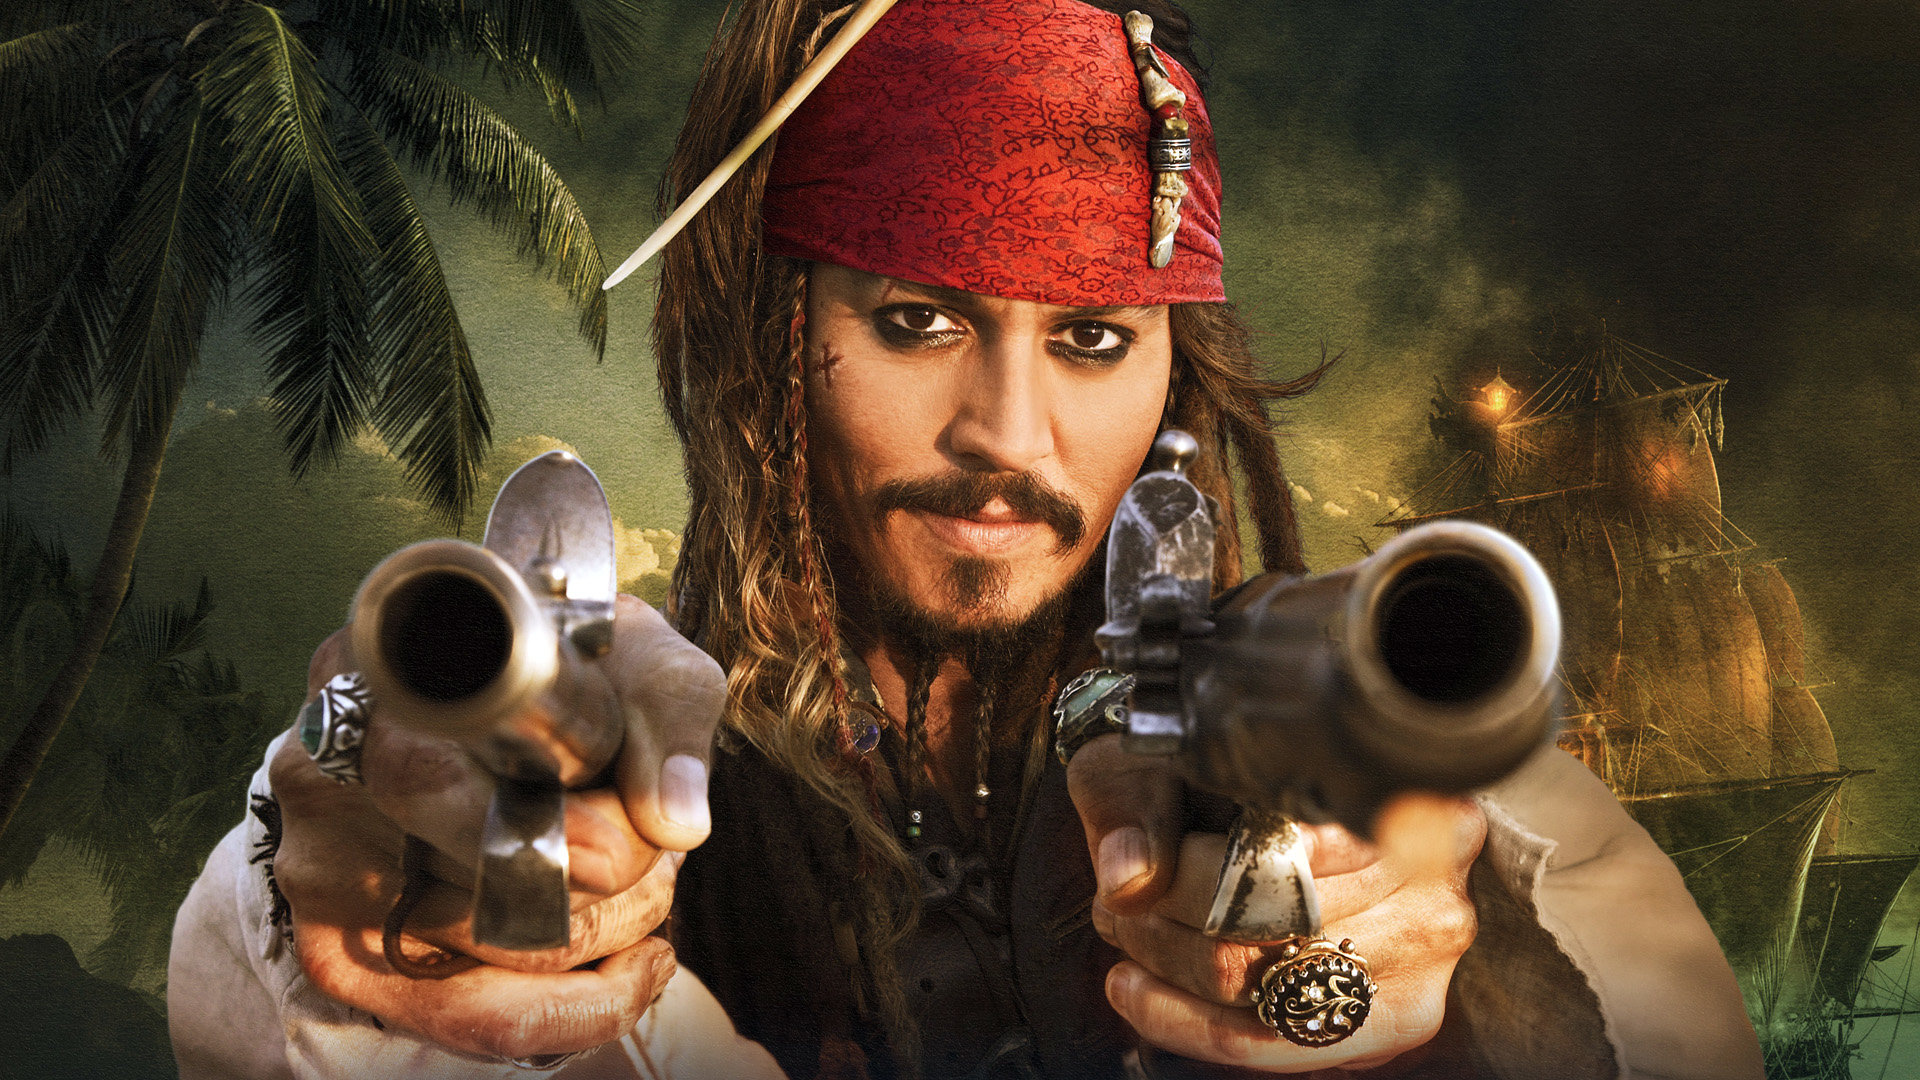 Johnny Depp: Capt. Jack Sparrow in Pirates of the Caribbean: The Curse of the Black Pearl, his first Academy Award nomination. 1920x1080 Full HD Background.